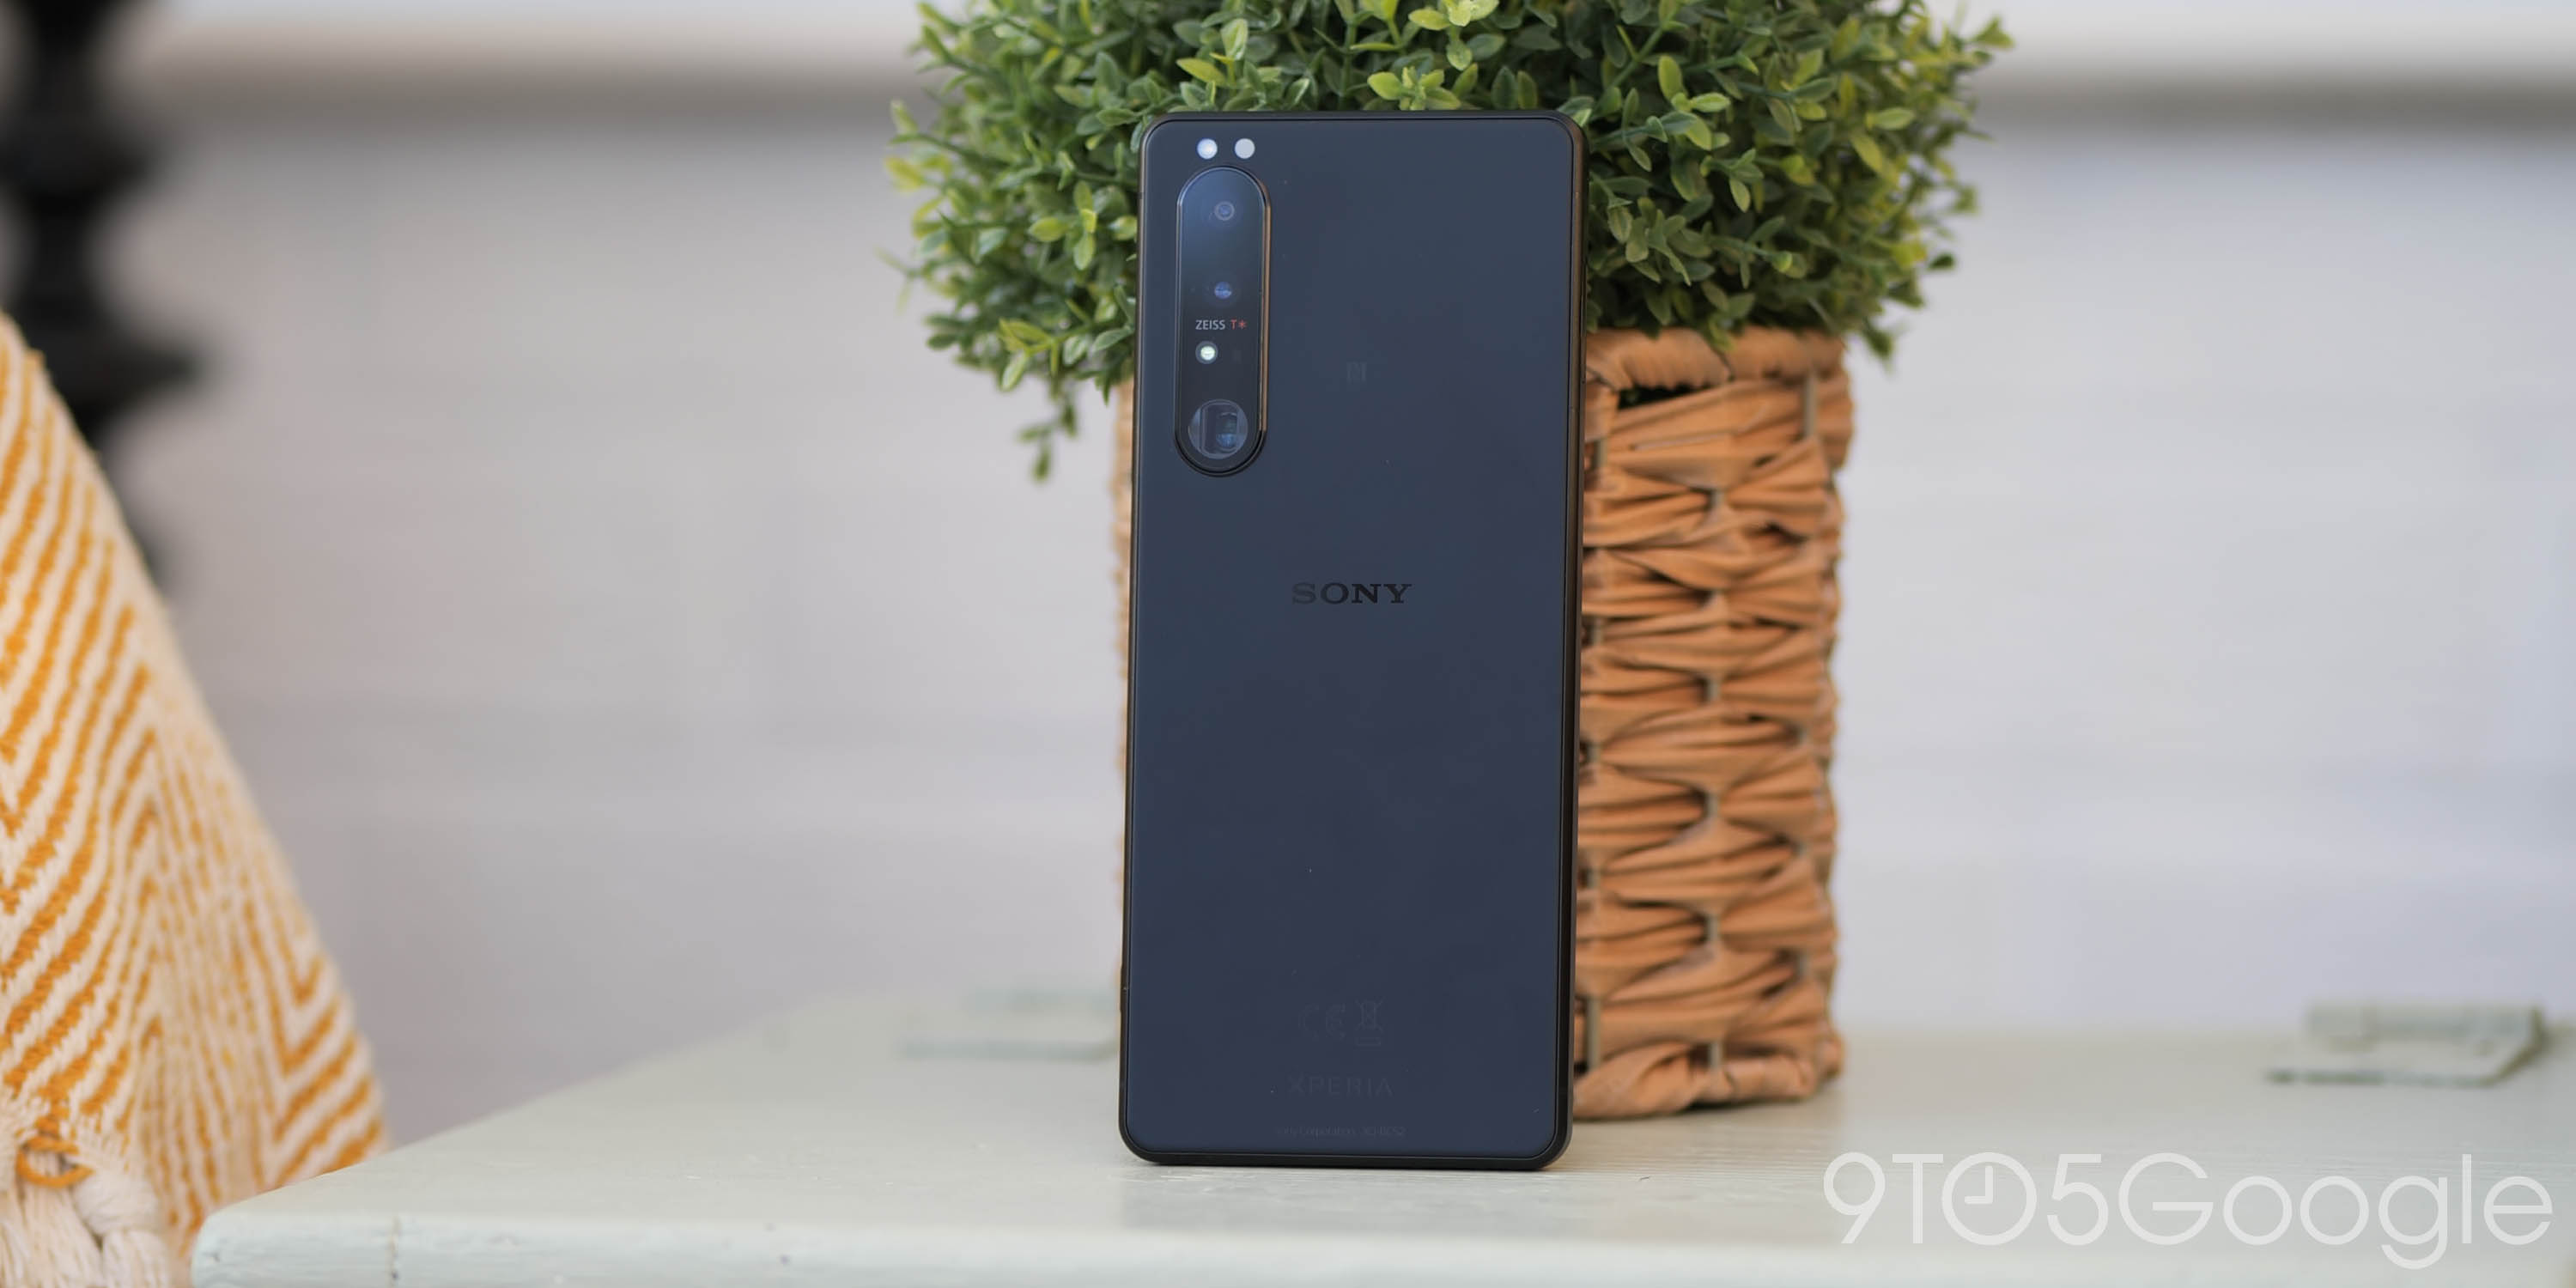 labyrint Elegantie kop Sony Xperia 1 III review: Android enthusiast excellence - 9to5Google